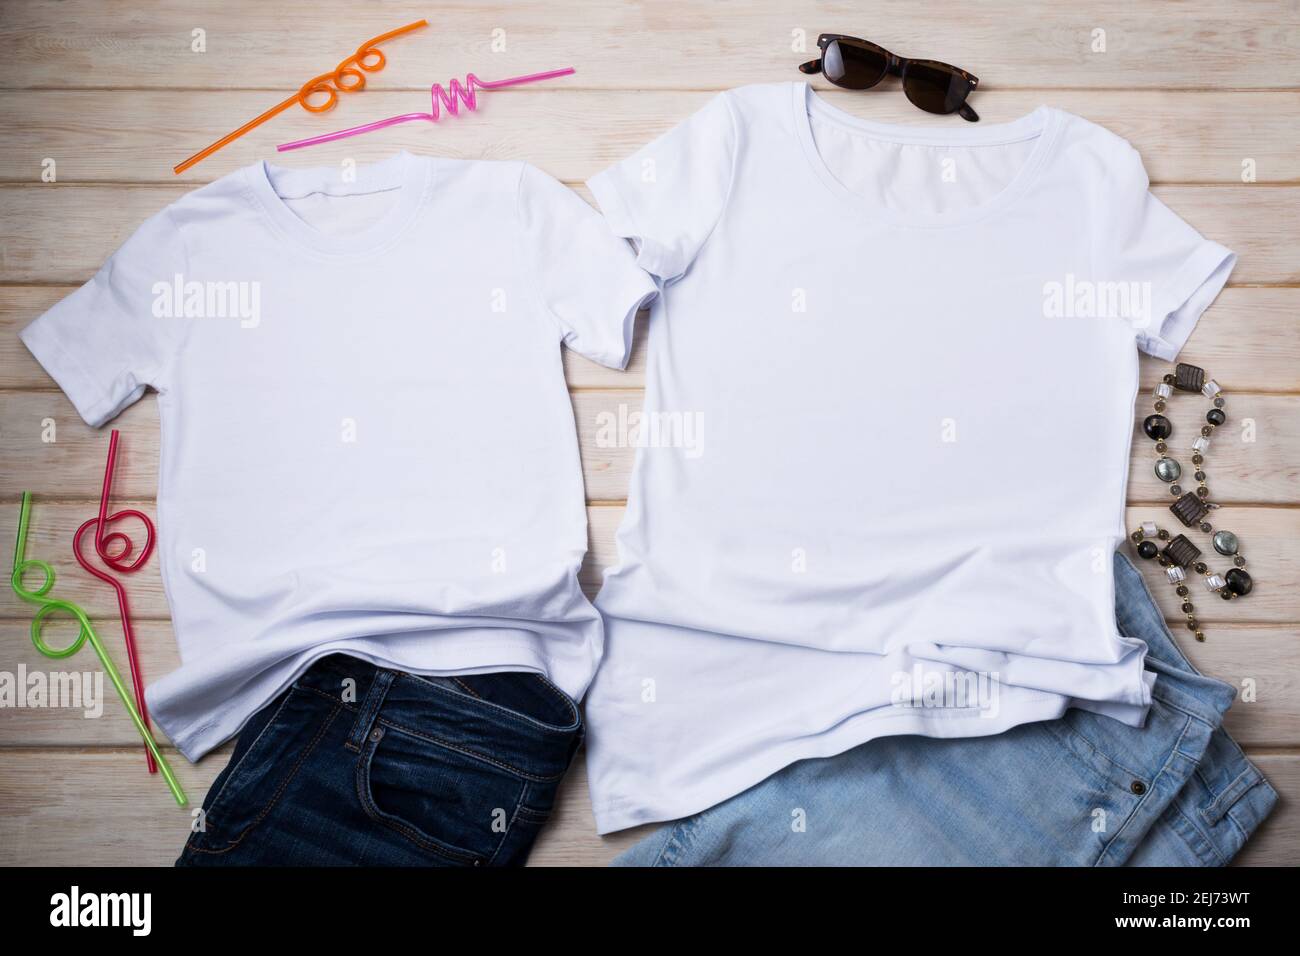 White family look cotton T-shirt mockup with necklace, sunglasses, jeans and decorative cocktail drinking straws. Design t shirt set template, tee pri Stock Photo